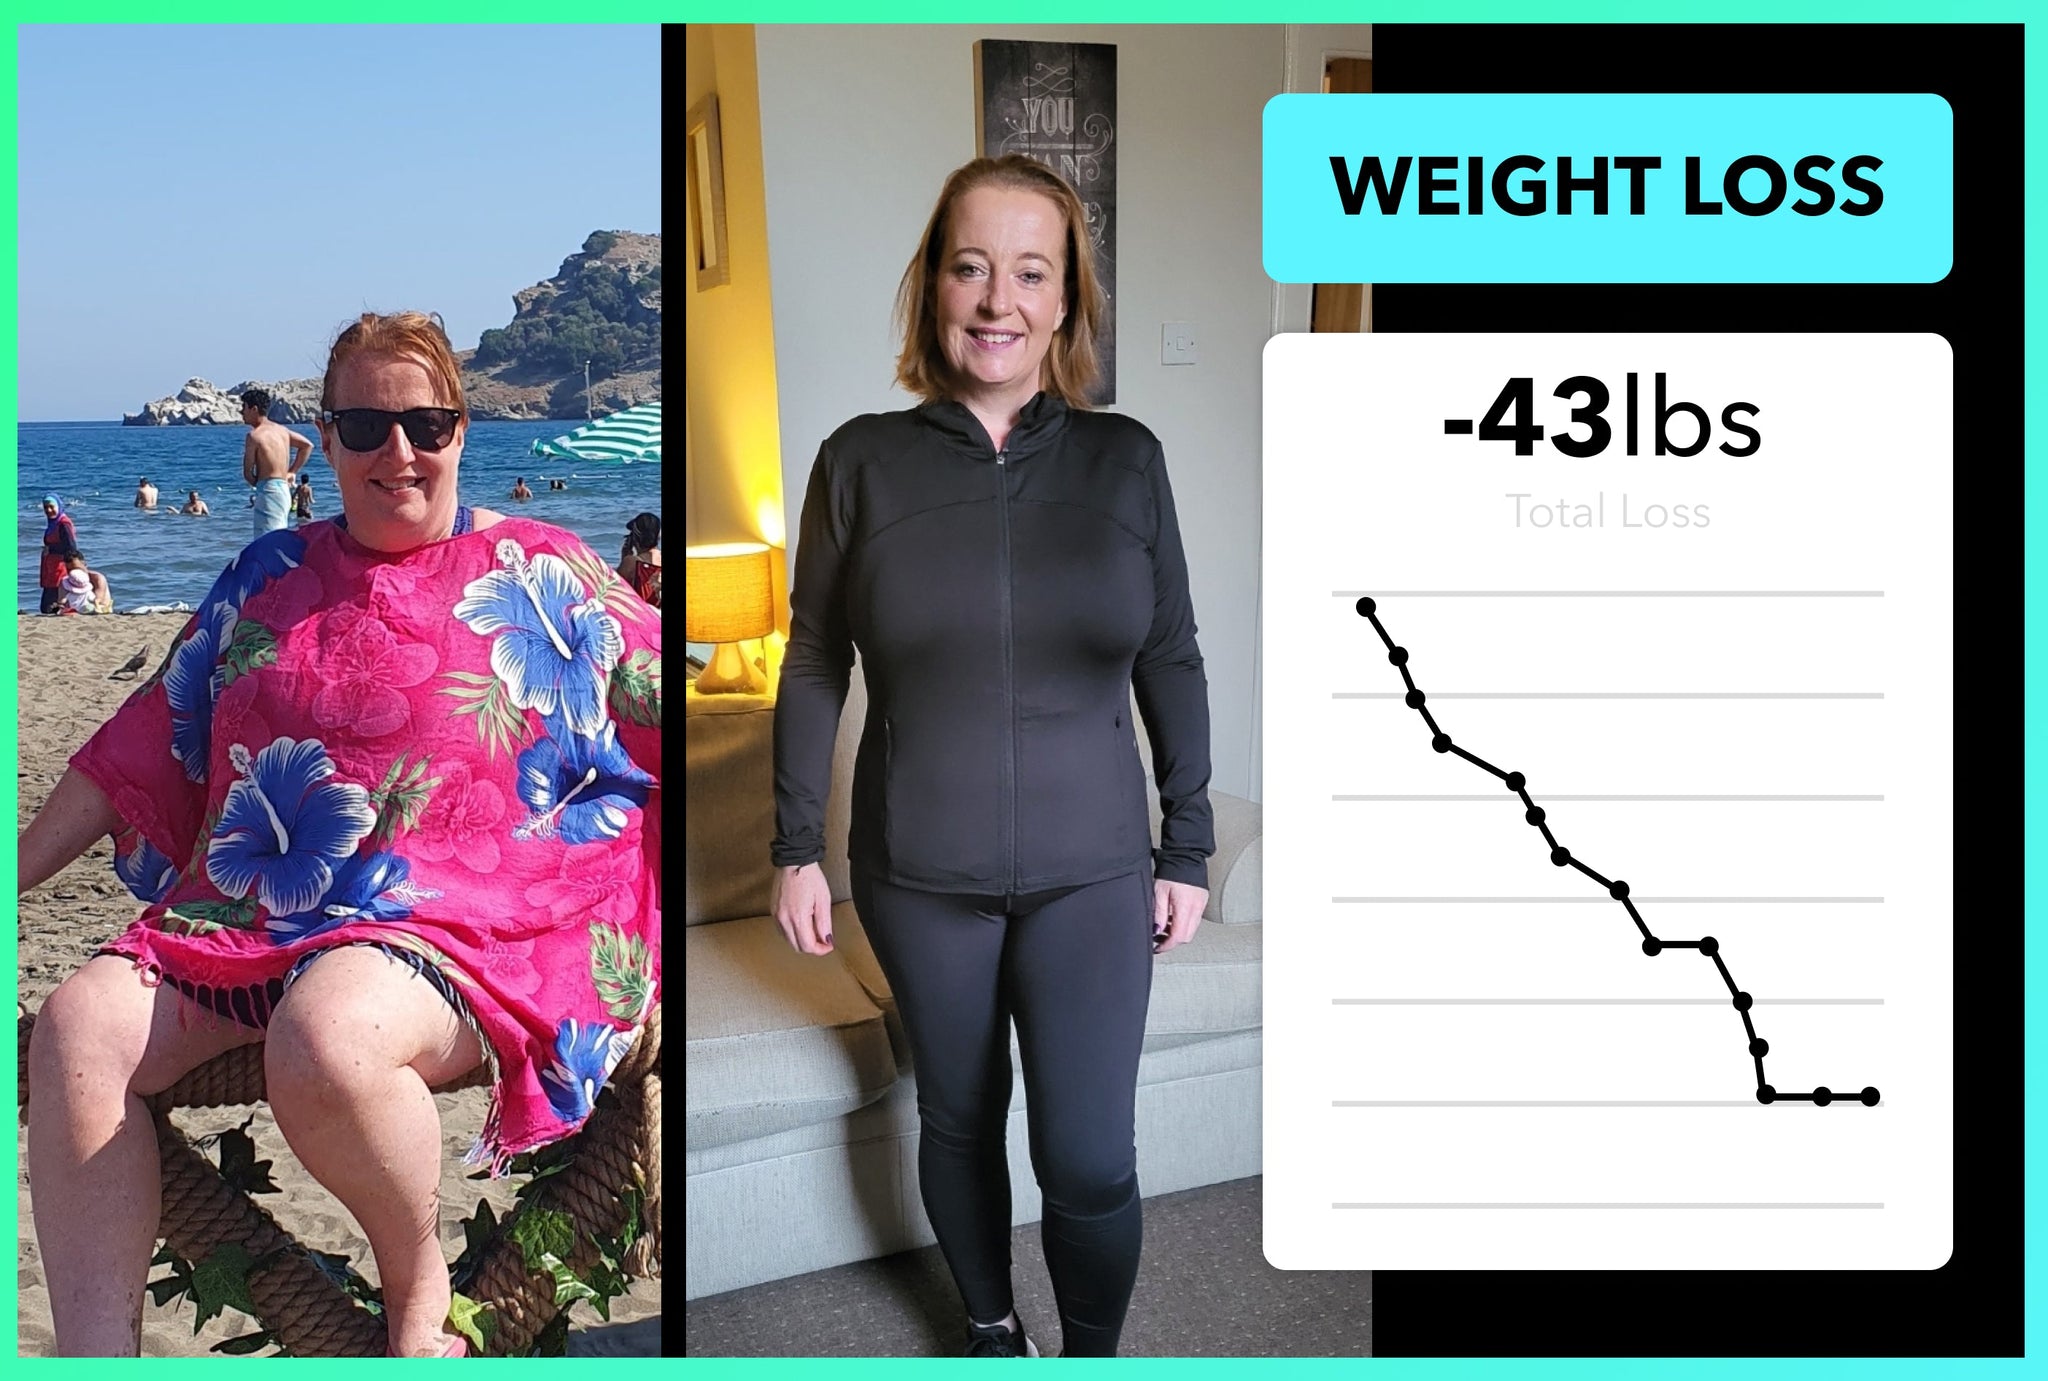 Gillian has lost 43lbs with Team RH!